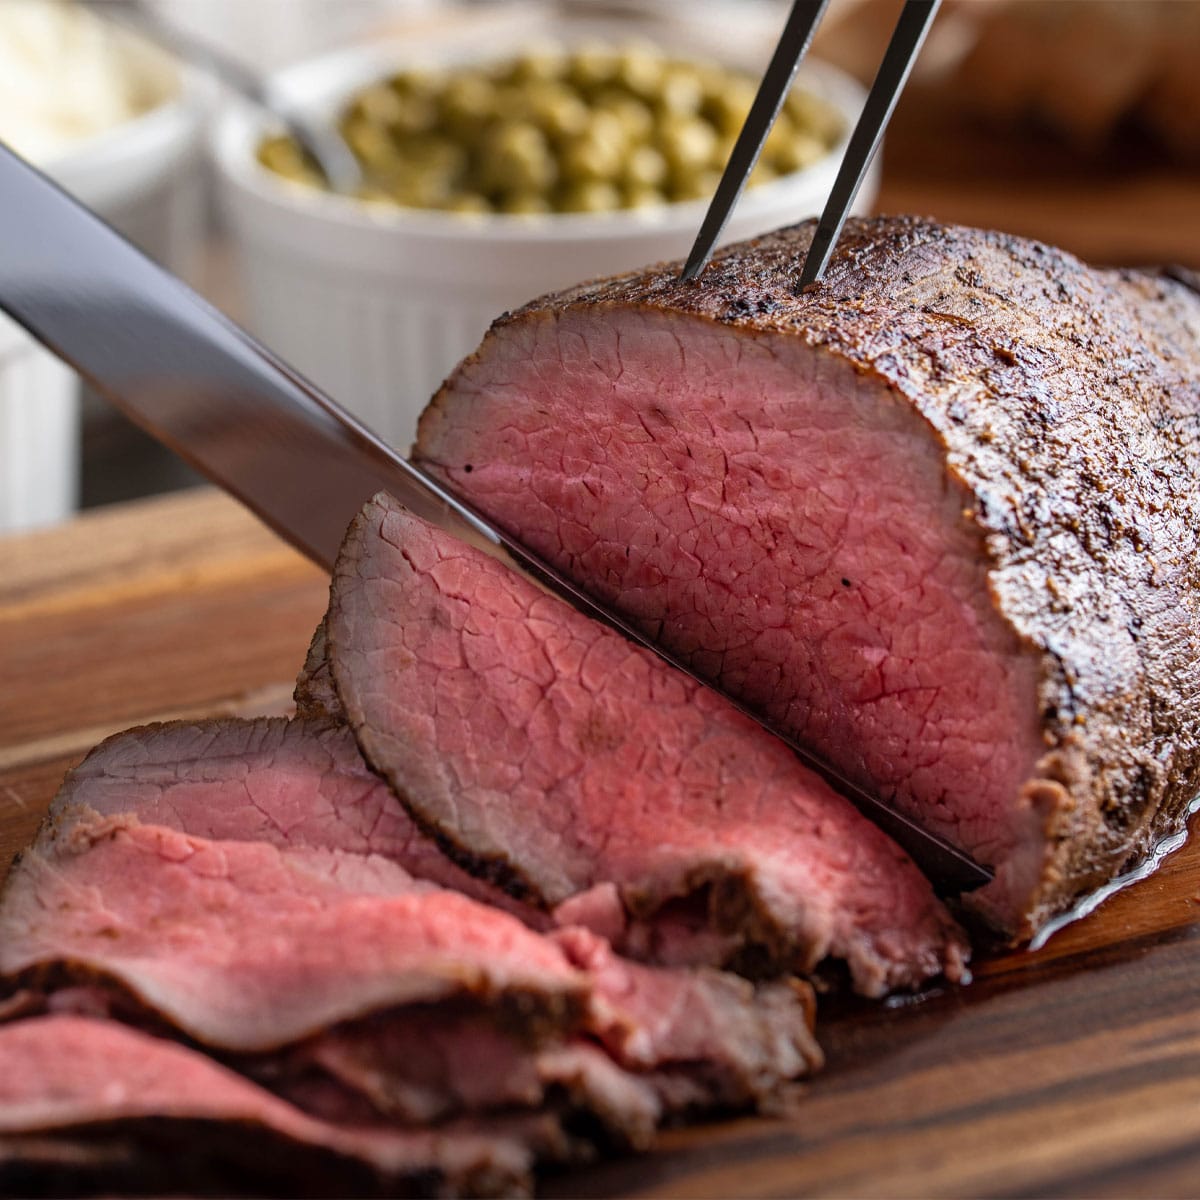 Air fried roast beef served on a chopping board.